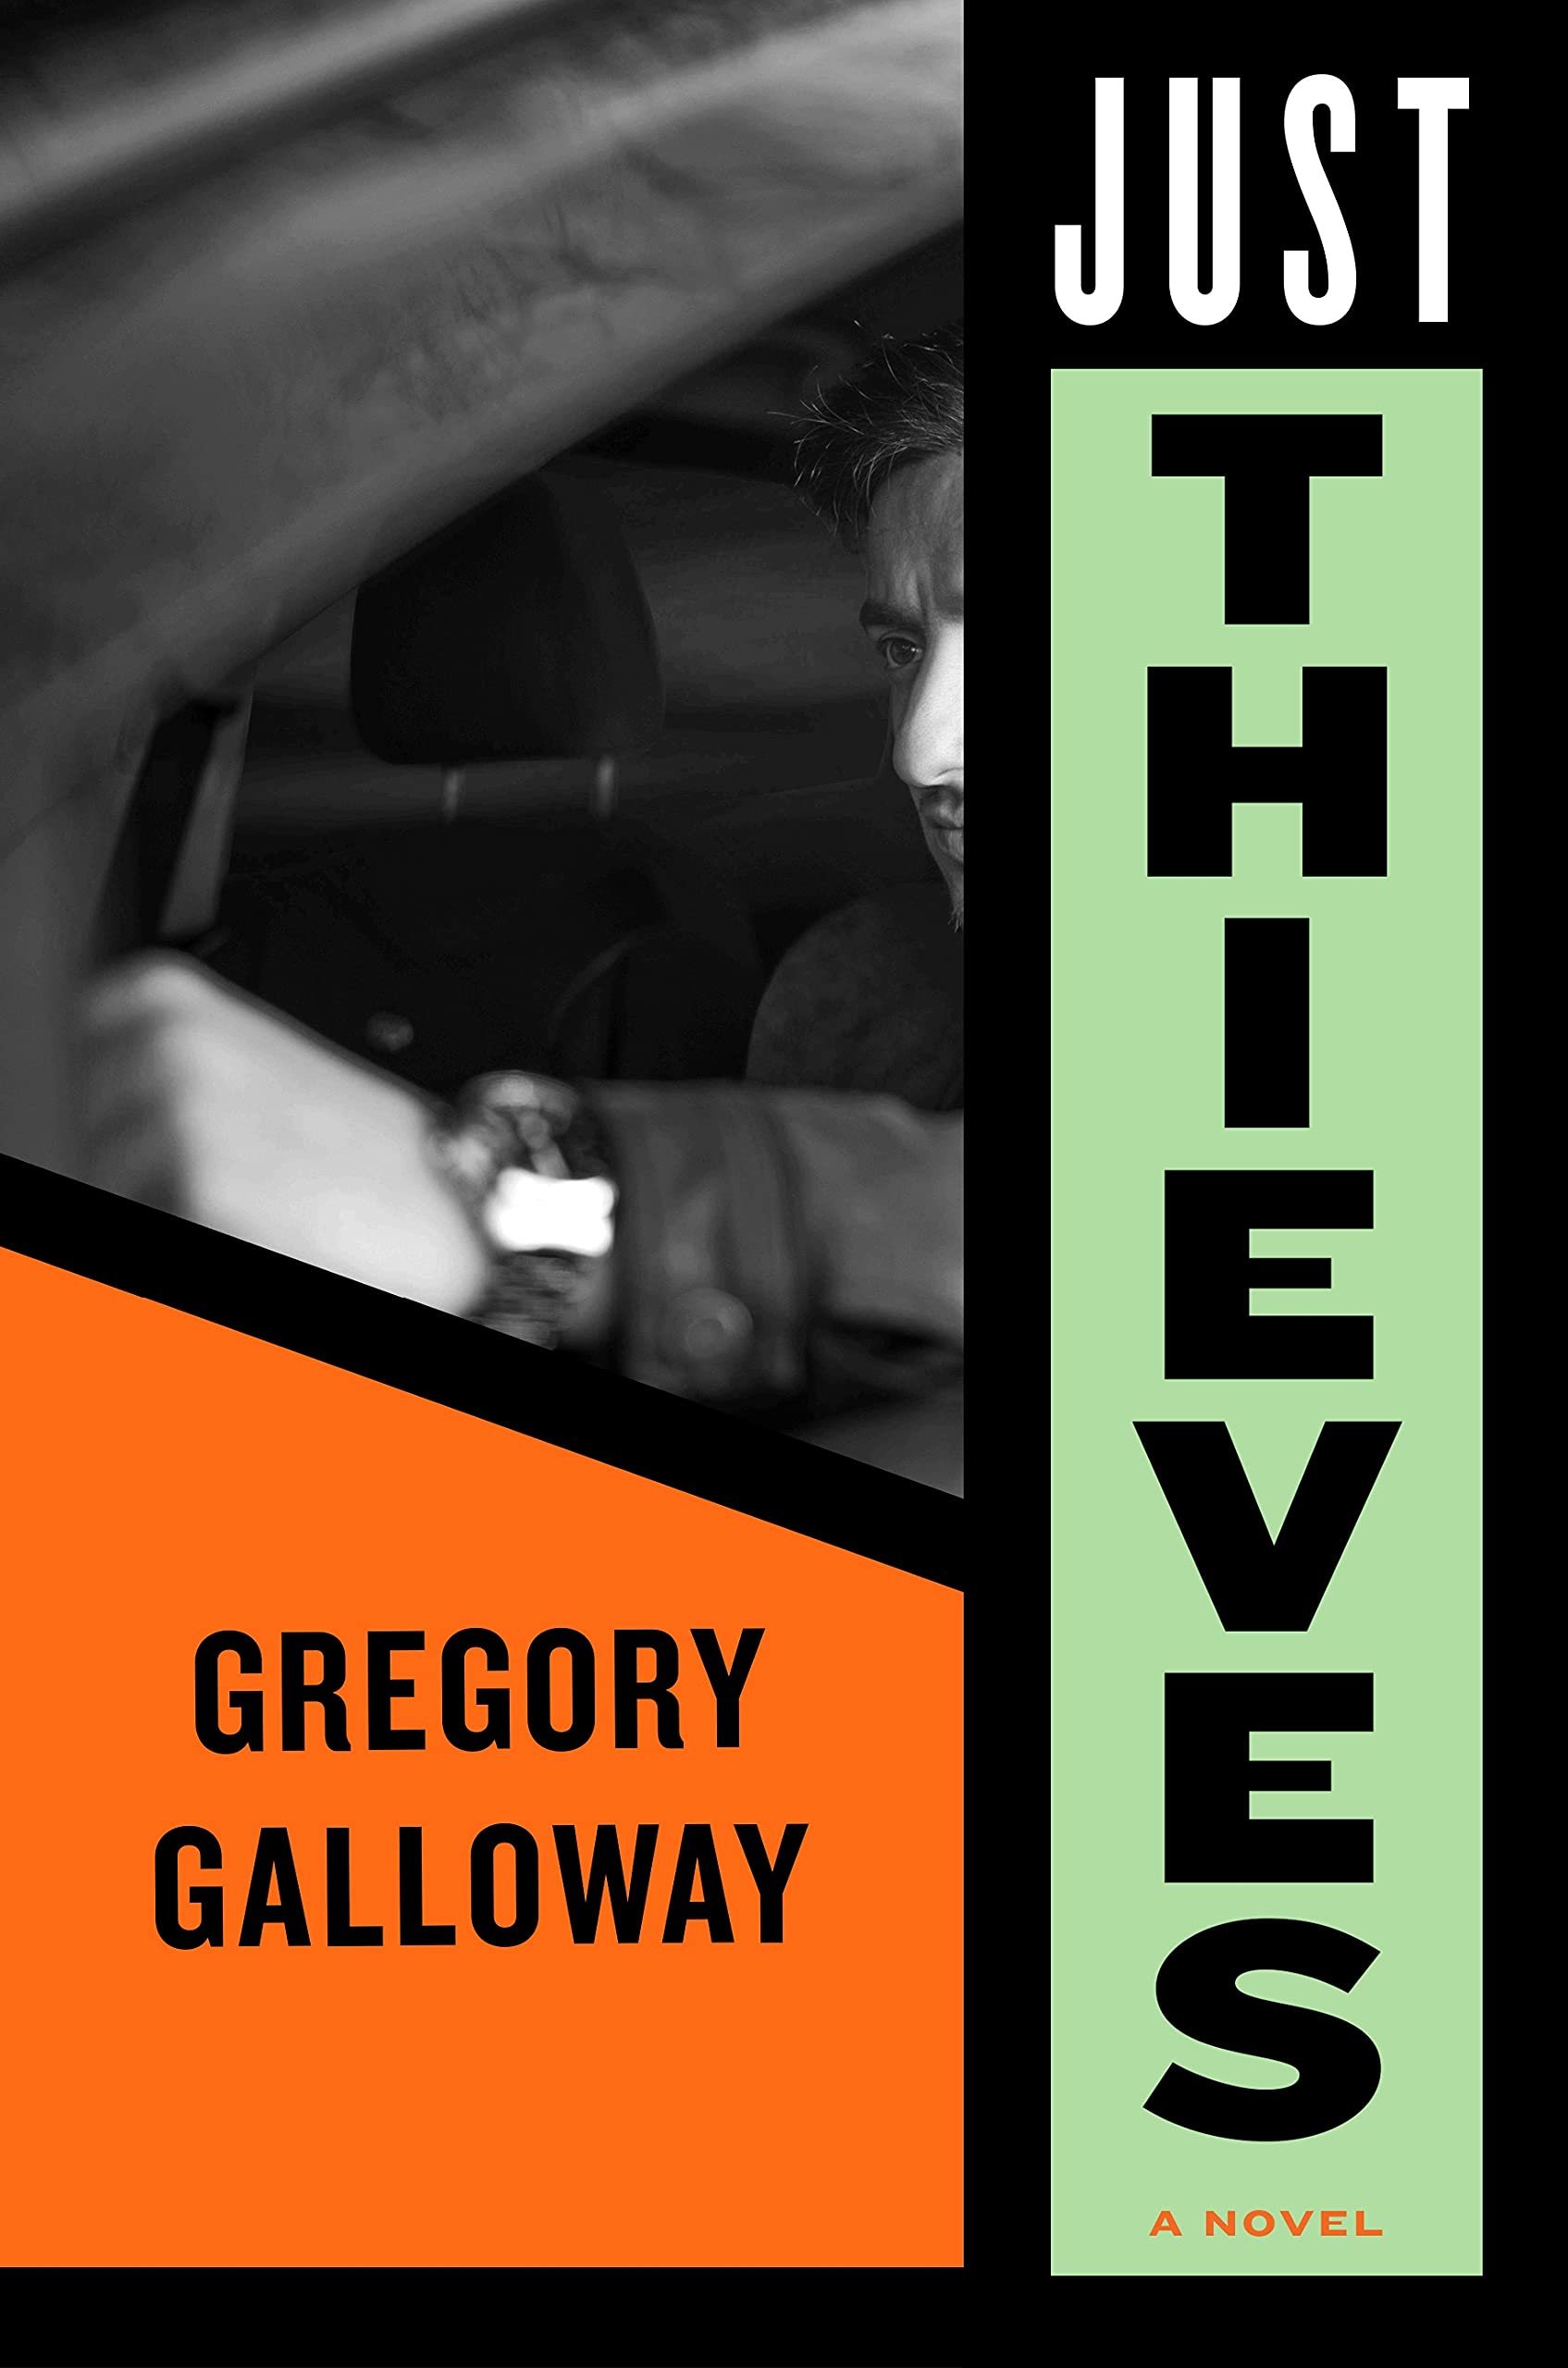 JUST THIEVES by Gregory Galloway